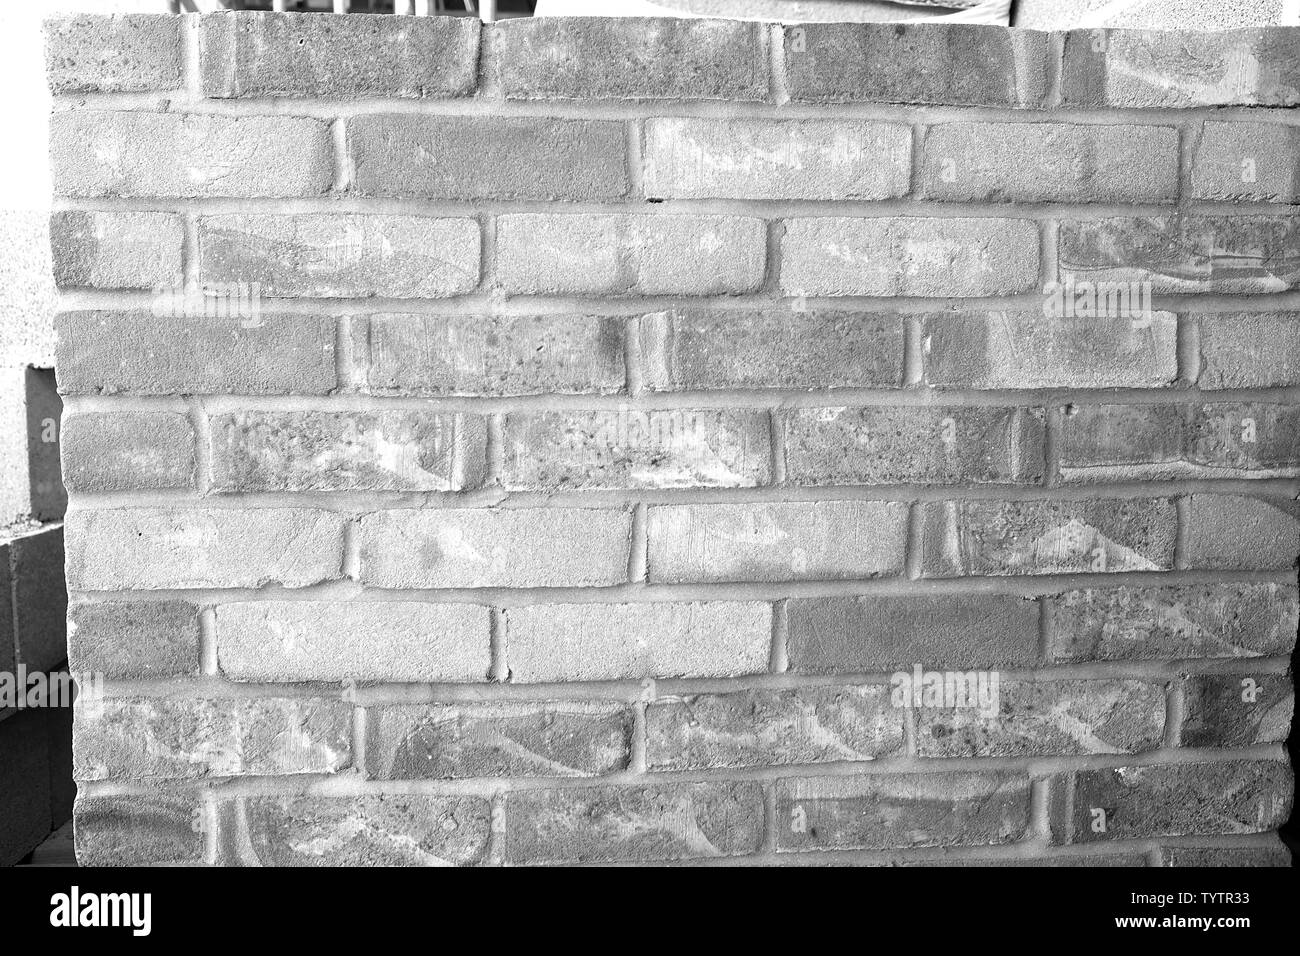 June 2019 - Brick wall background or texture Stock Photo